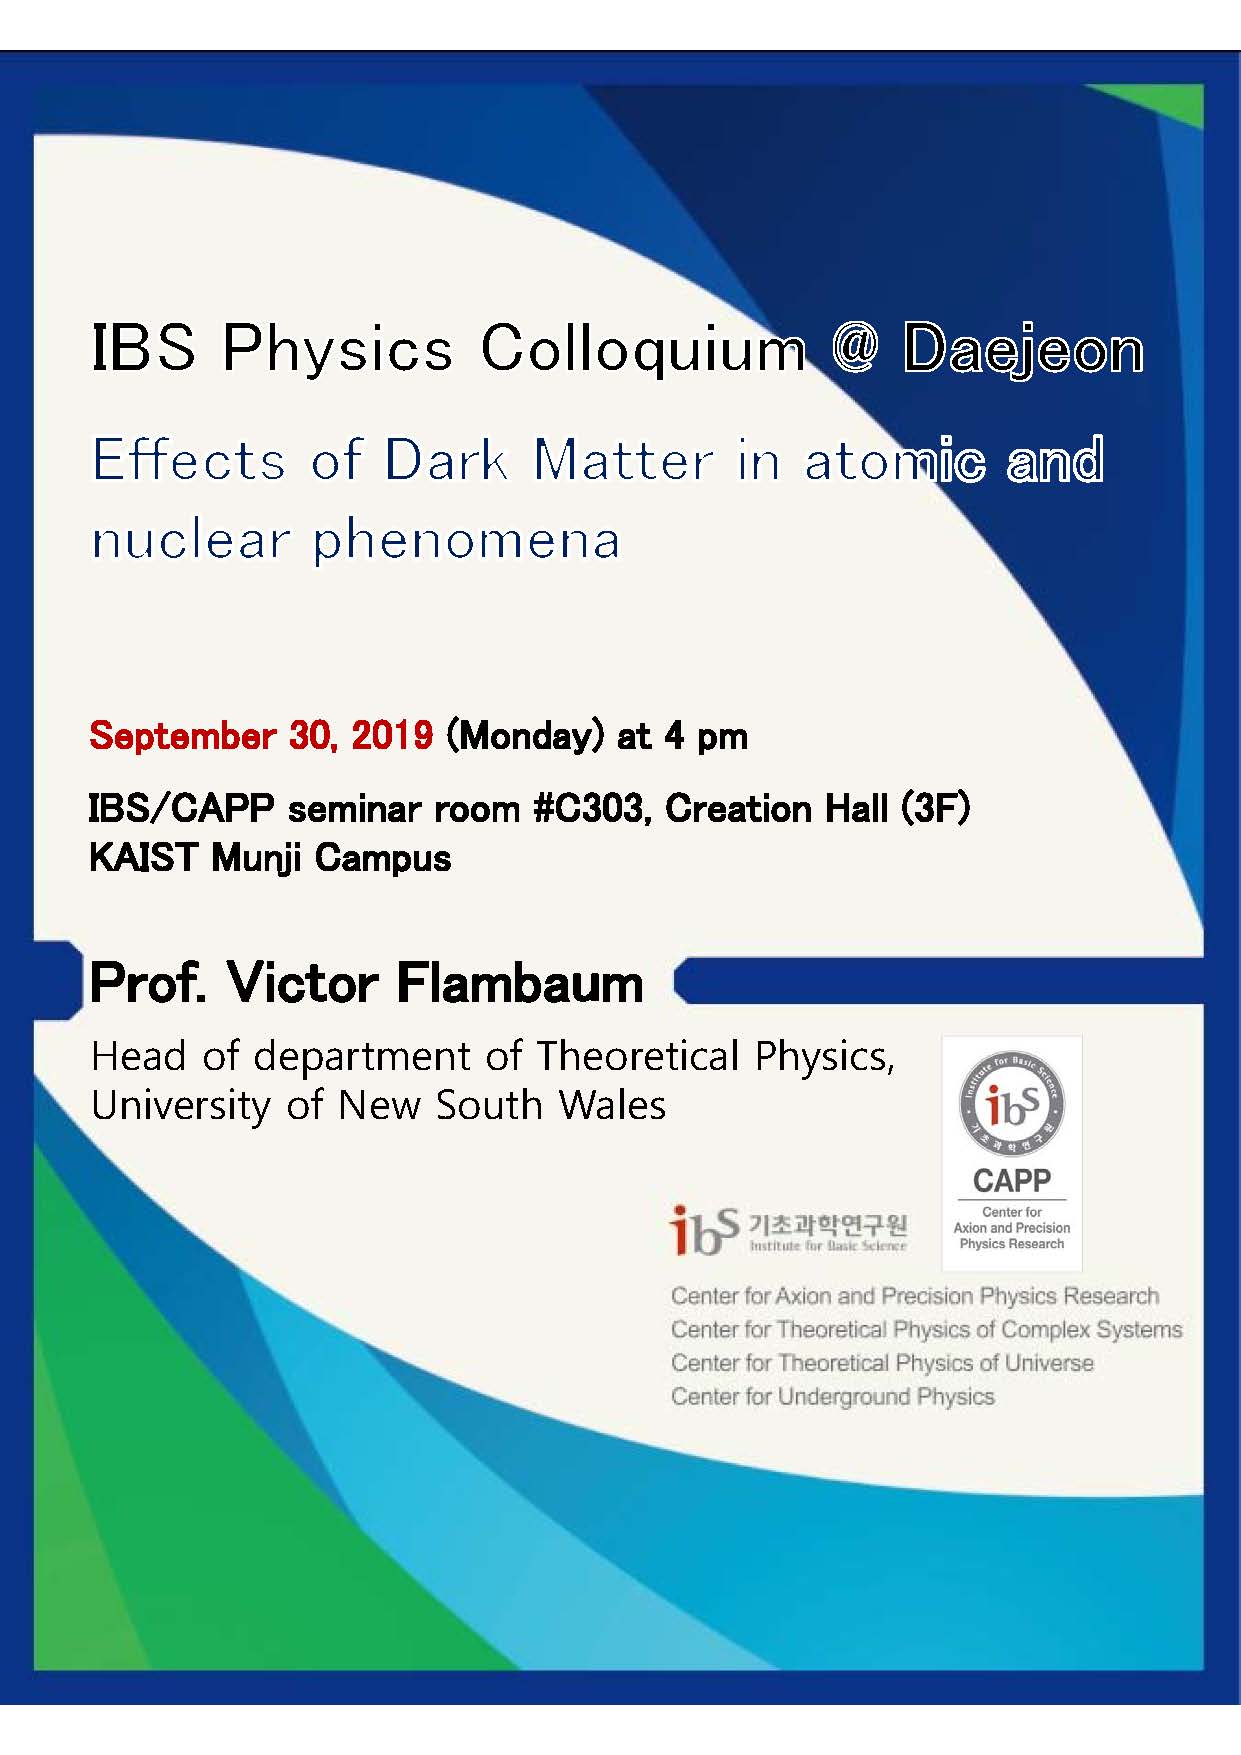 [IBS Colloquium] Effects of Dark Matter in atomic and nuclear phenomena by Prof. Victor Flambaum